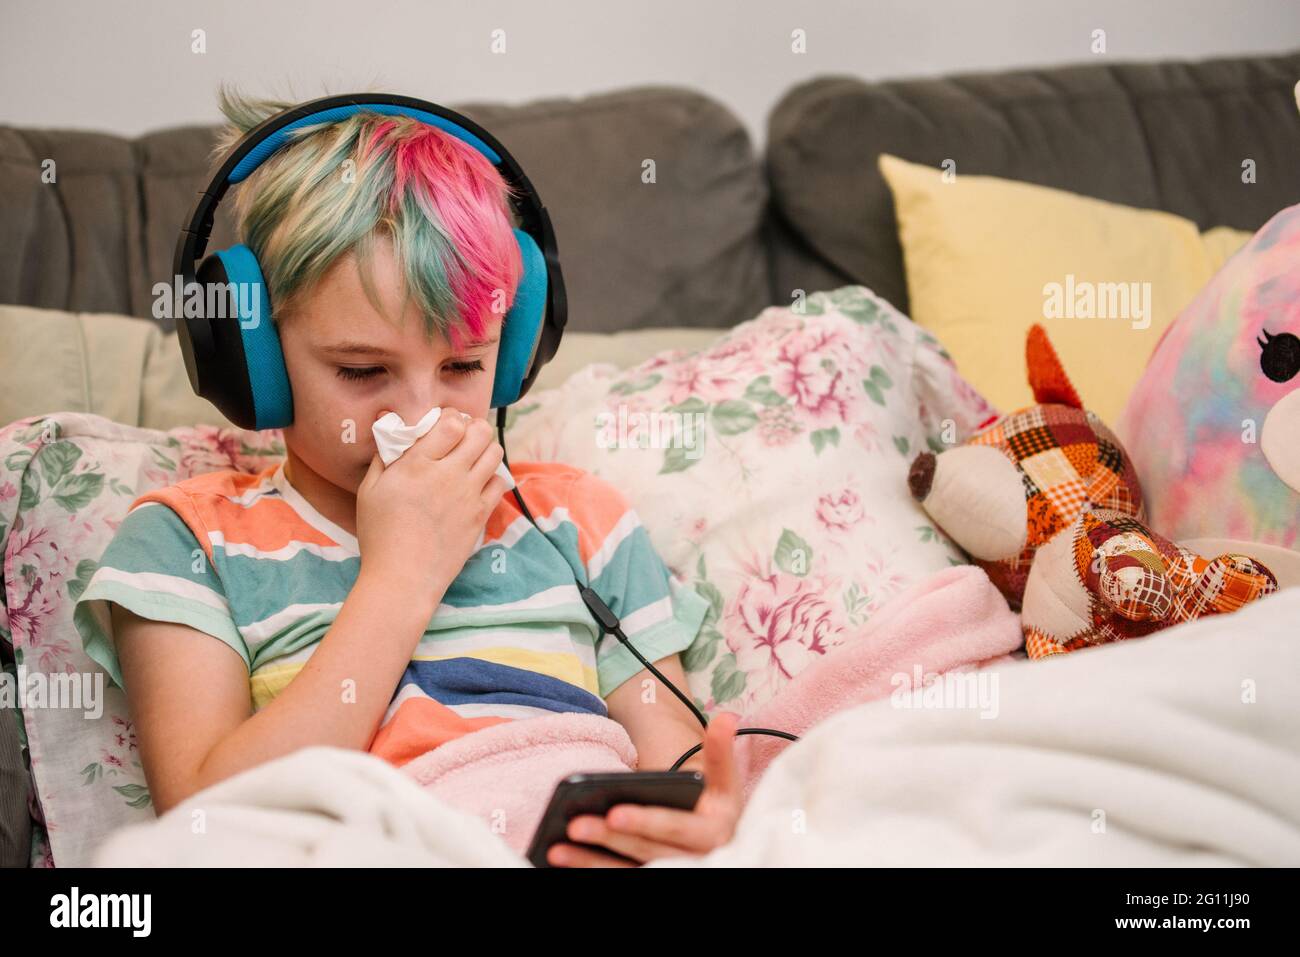 Canada, Ontario, Boy with colorful hair and headphones blowing nose on sofa Stock Photo